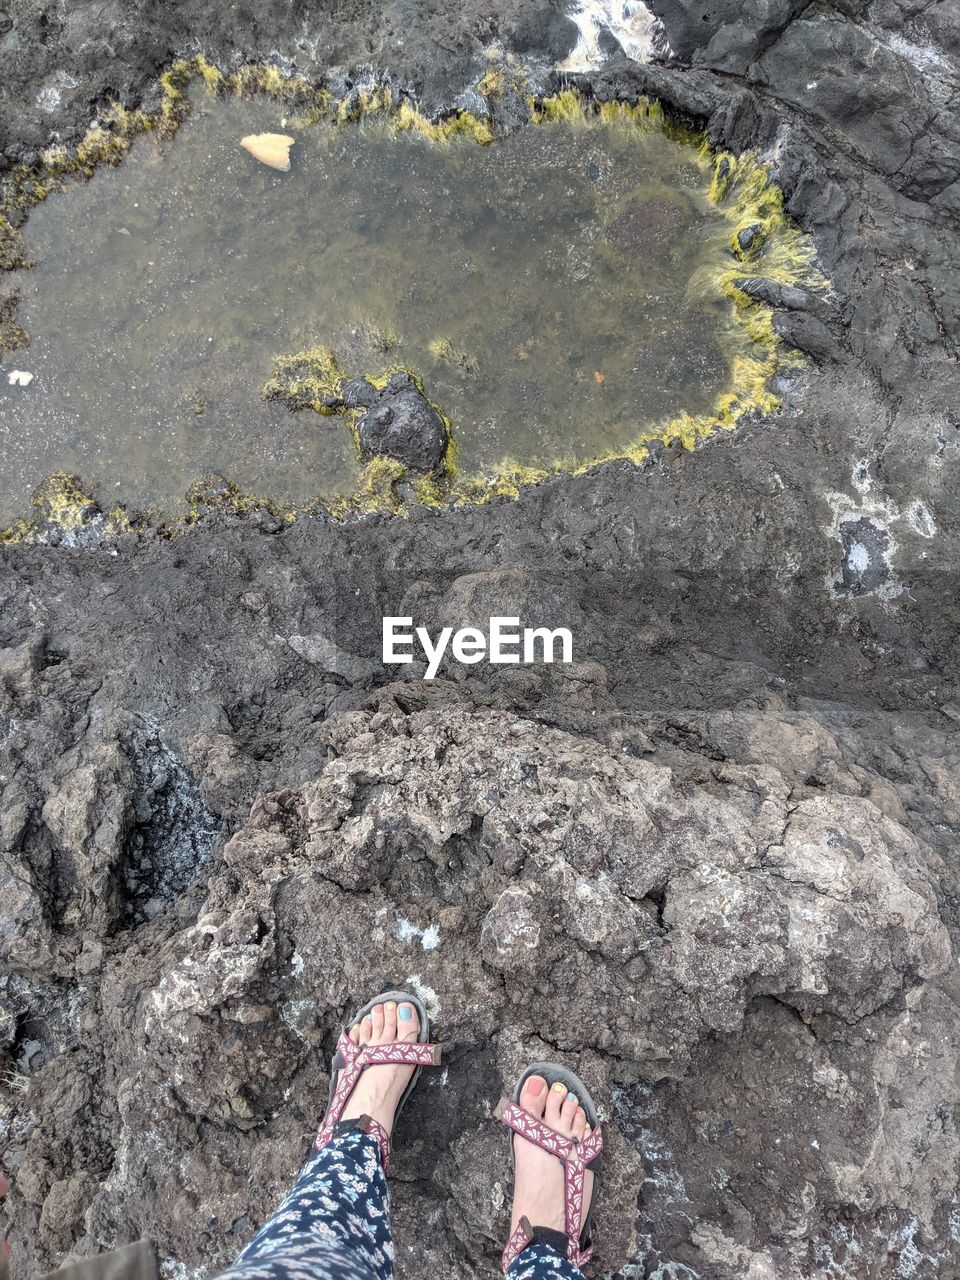 low section, human leg, high angle view, soil, shoe, one person, geology, personal perspective, day, rock, standing, lifestyles, leisure activity, nature, land, directly above, human foot, outdoors, asphalt, beach, women, water, men, casual clothing